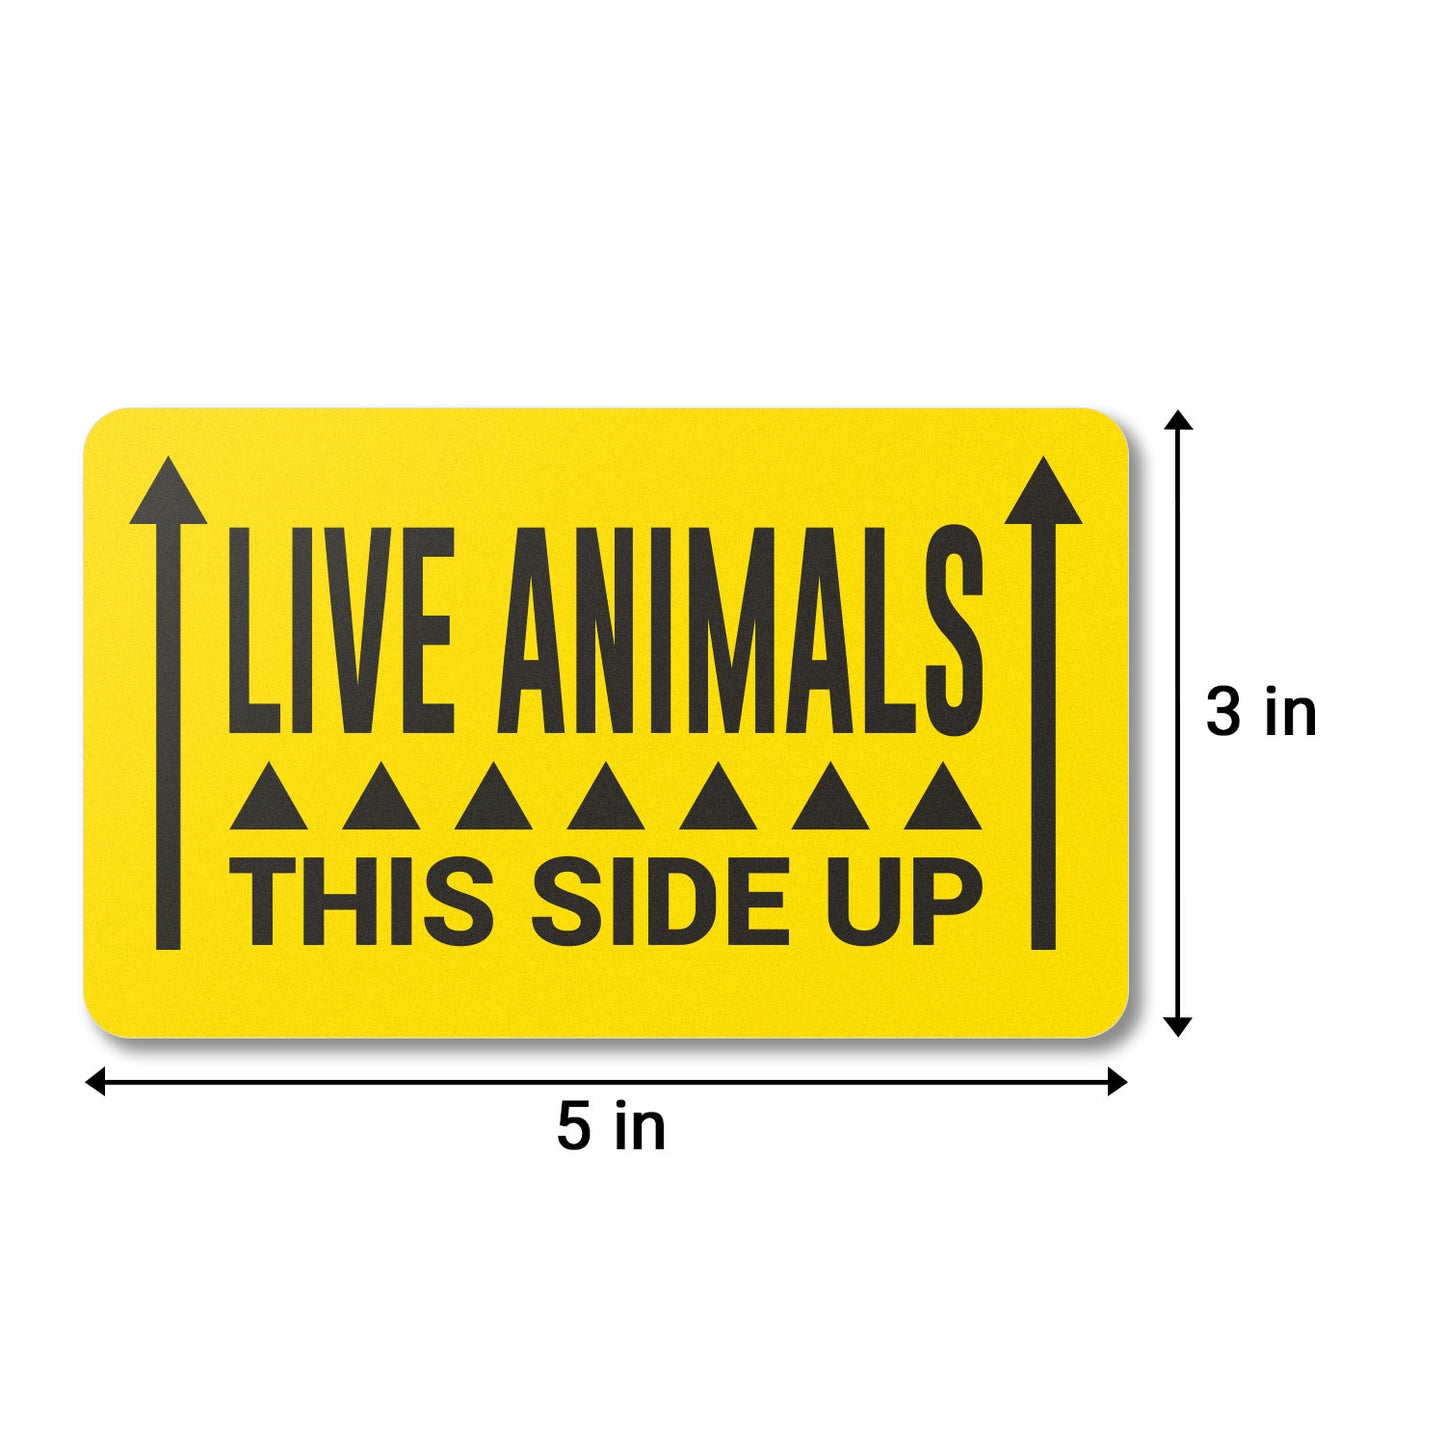 5 x 3 inch | Shipping & Handling: This Side Up, Live Animals Stickers